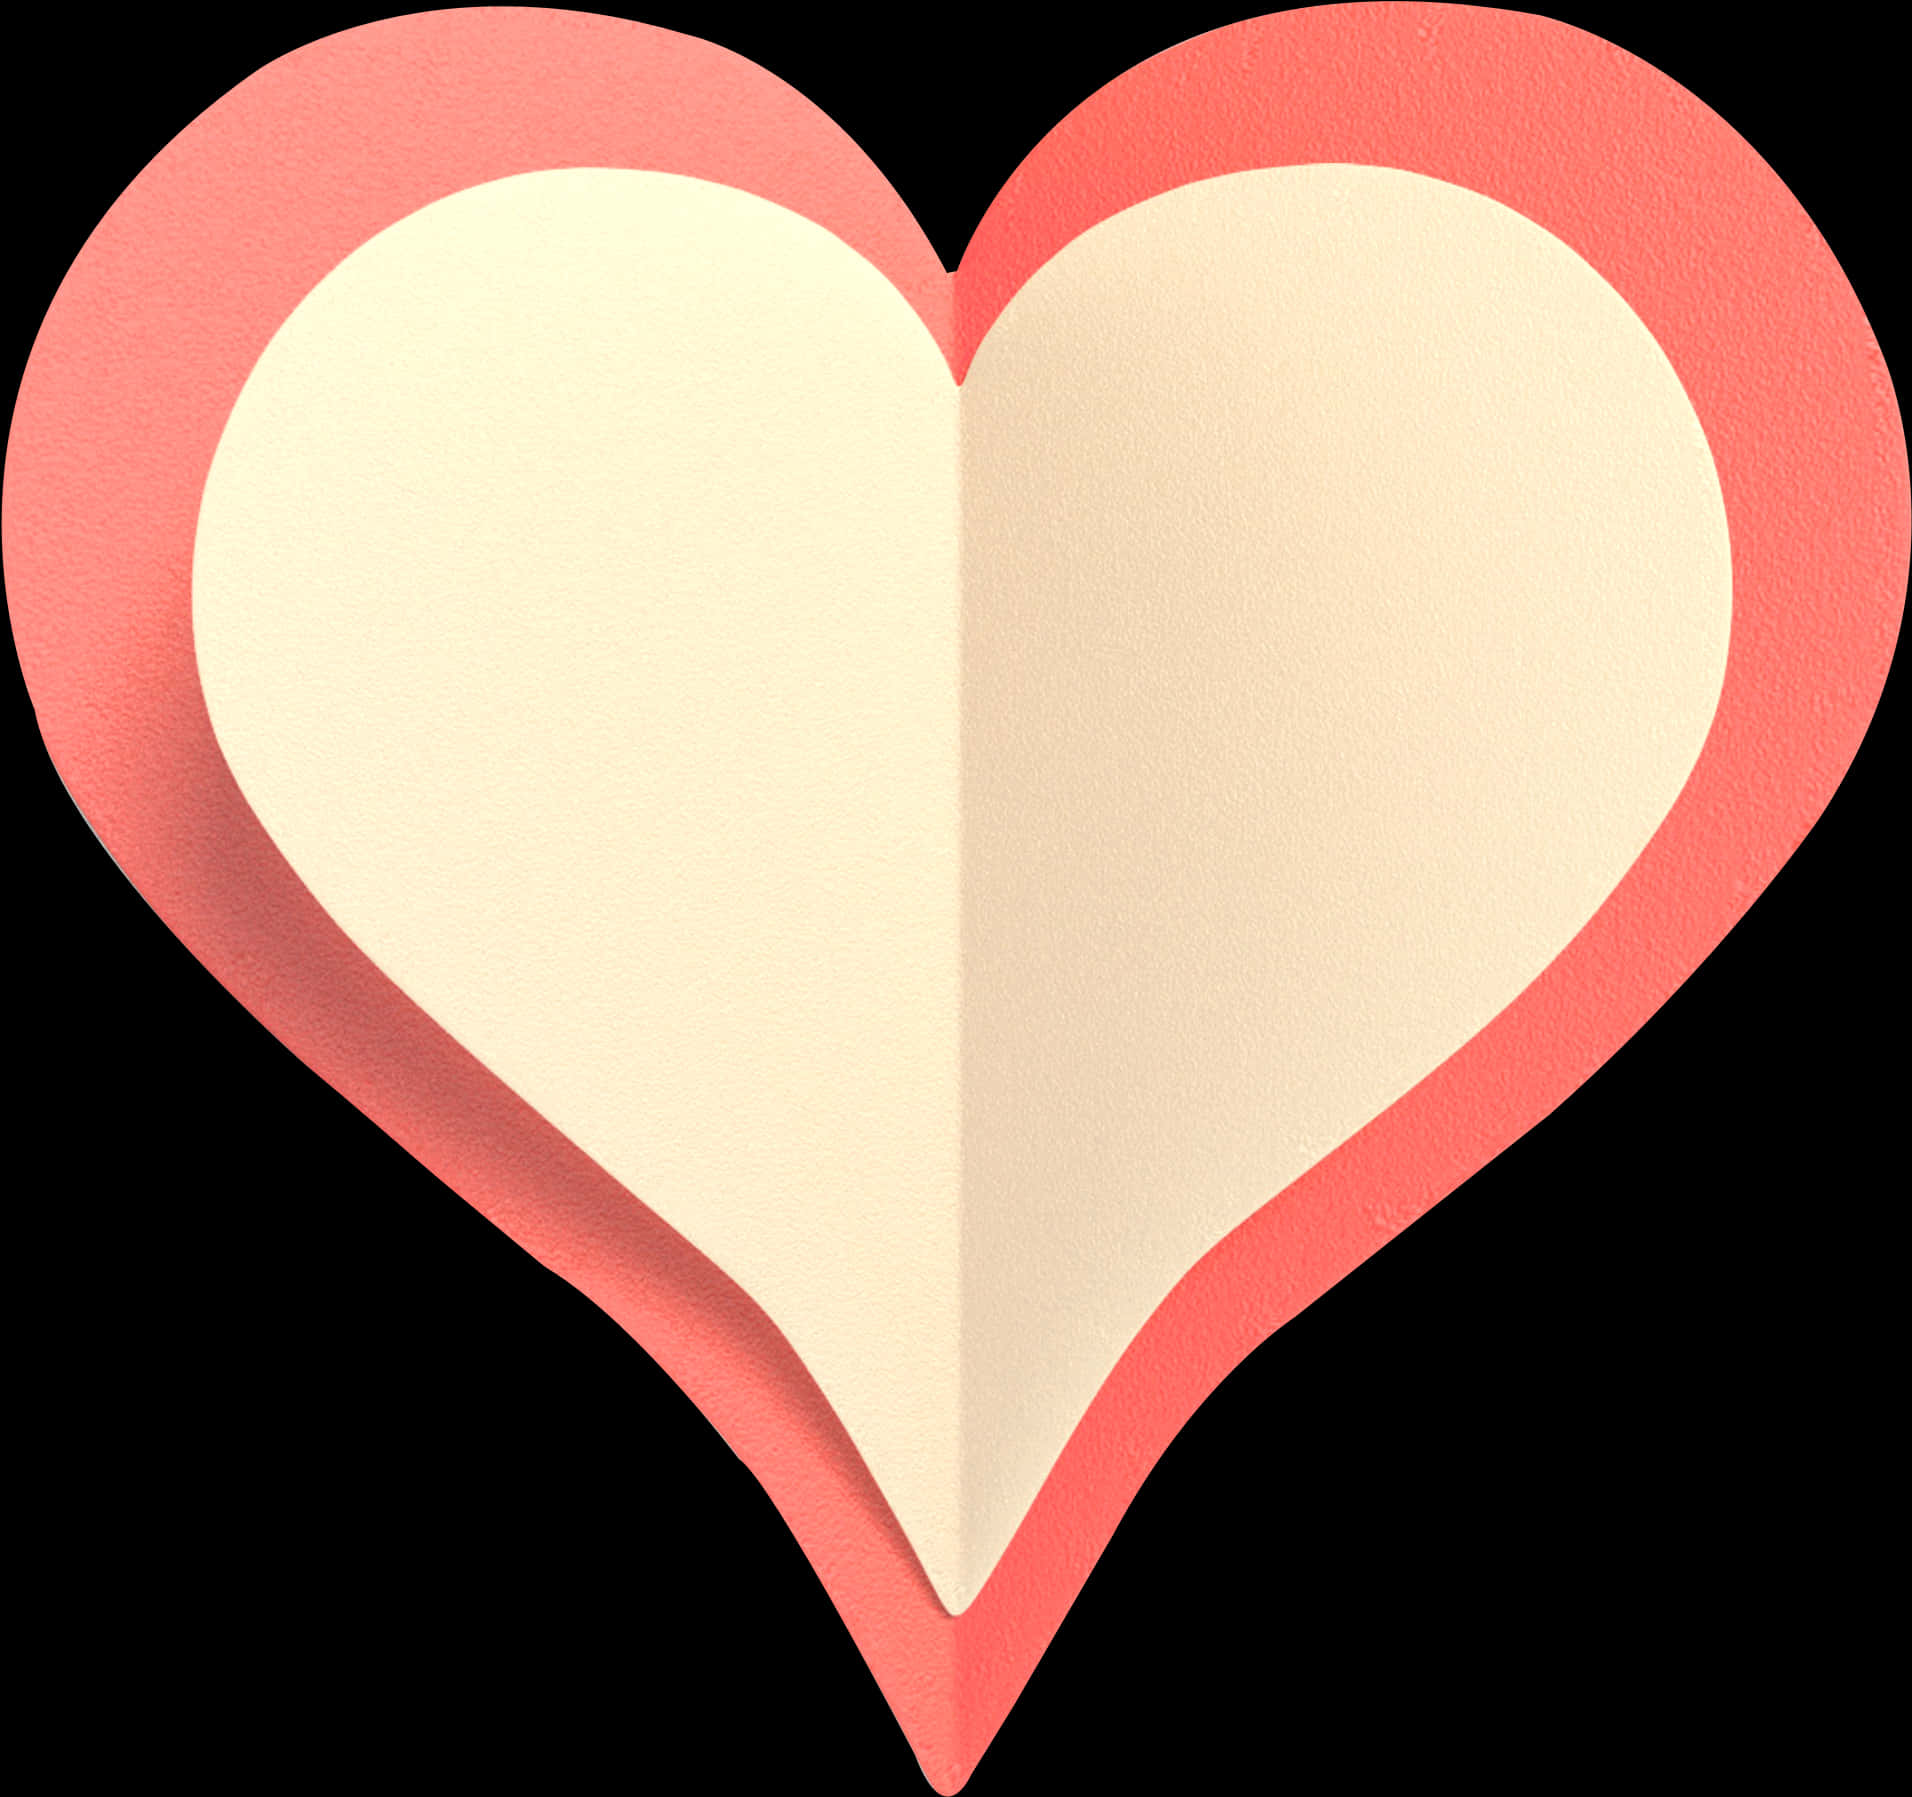 Paper Texture Heart Graphic PNG